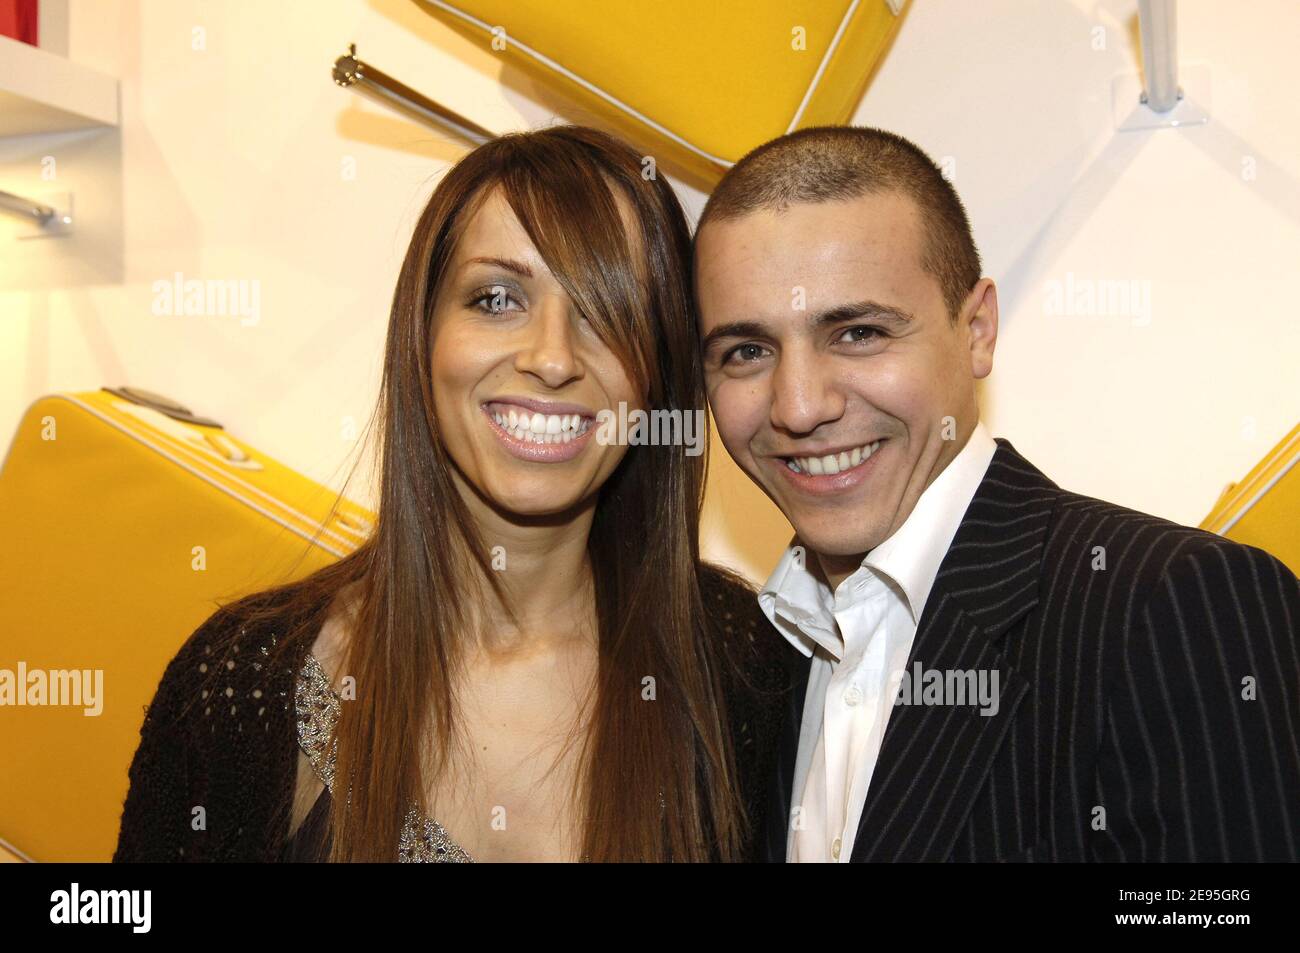 Singer Faudel and his wife attend the Lancel store opening party on the Champs Elysees in Paris, France, on January 26, 2006. Photo by Nicolas Gouhier/ABACAPRESS.COM Stock Photo